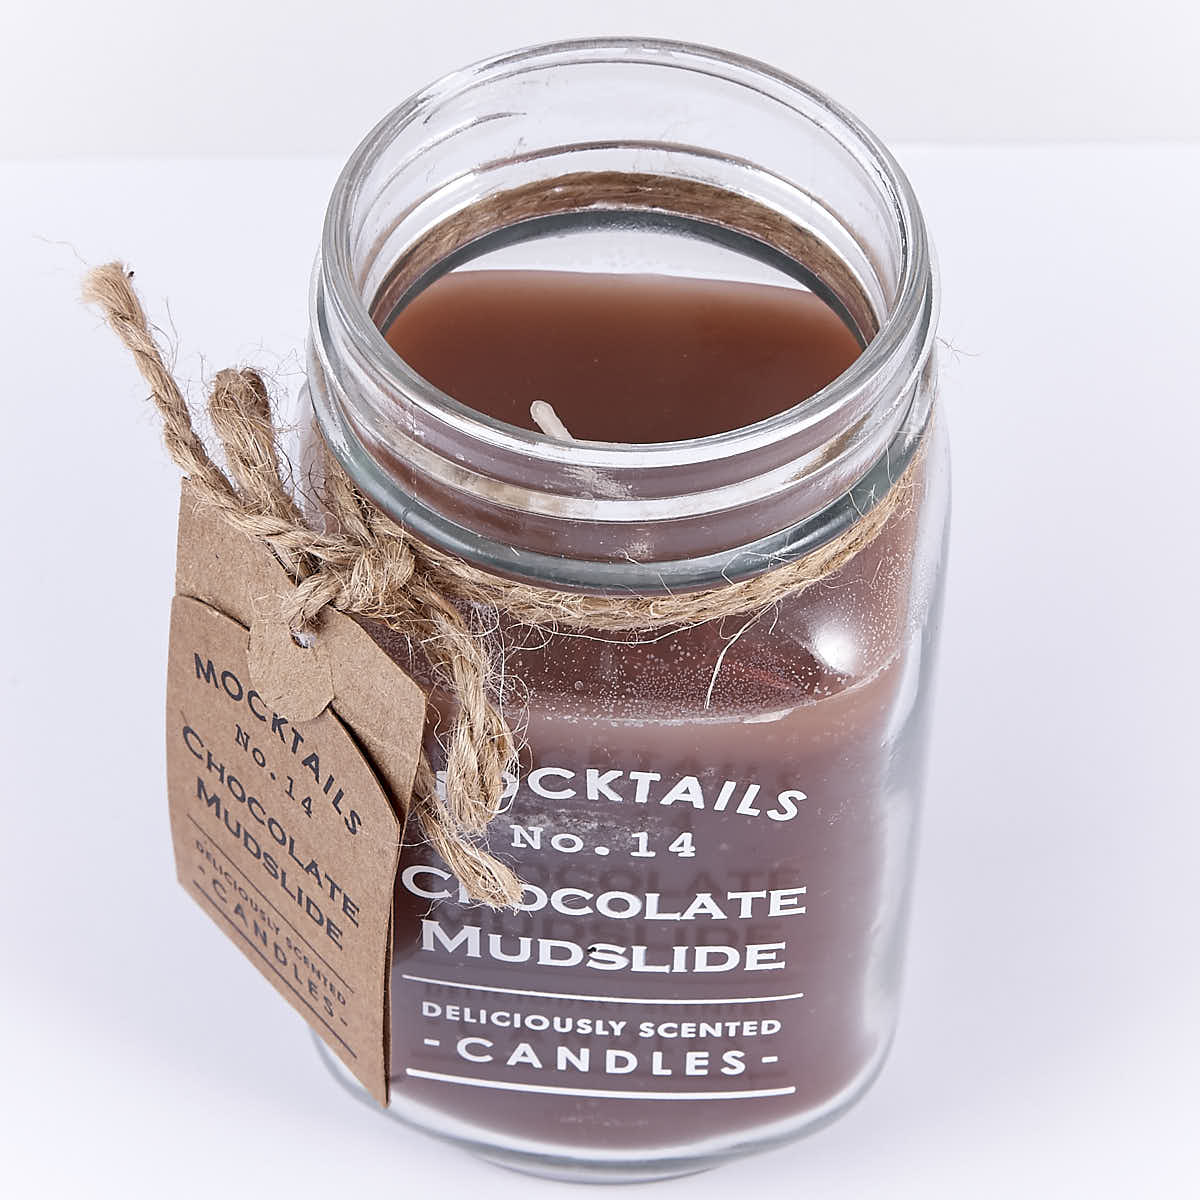 Chocolate Mudslide Mocktail Scented Candle